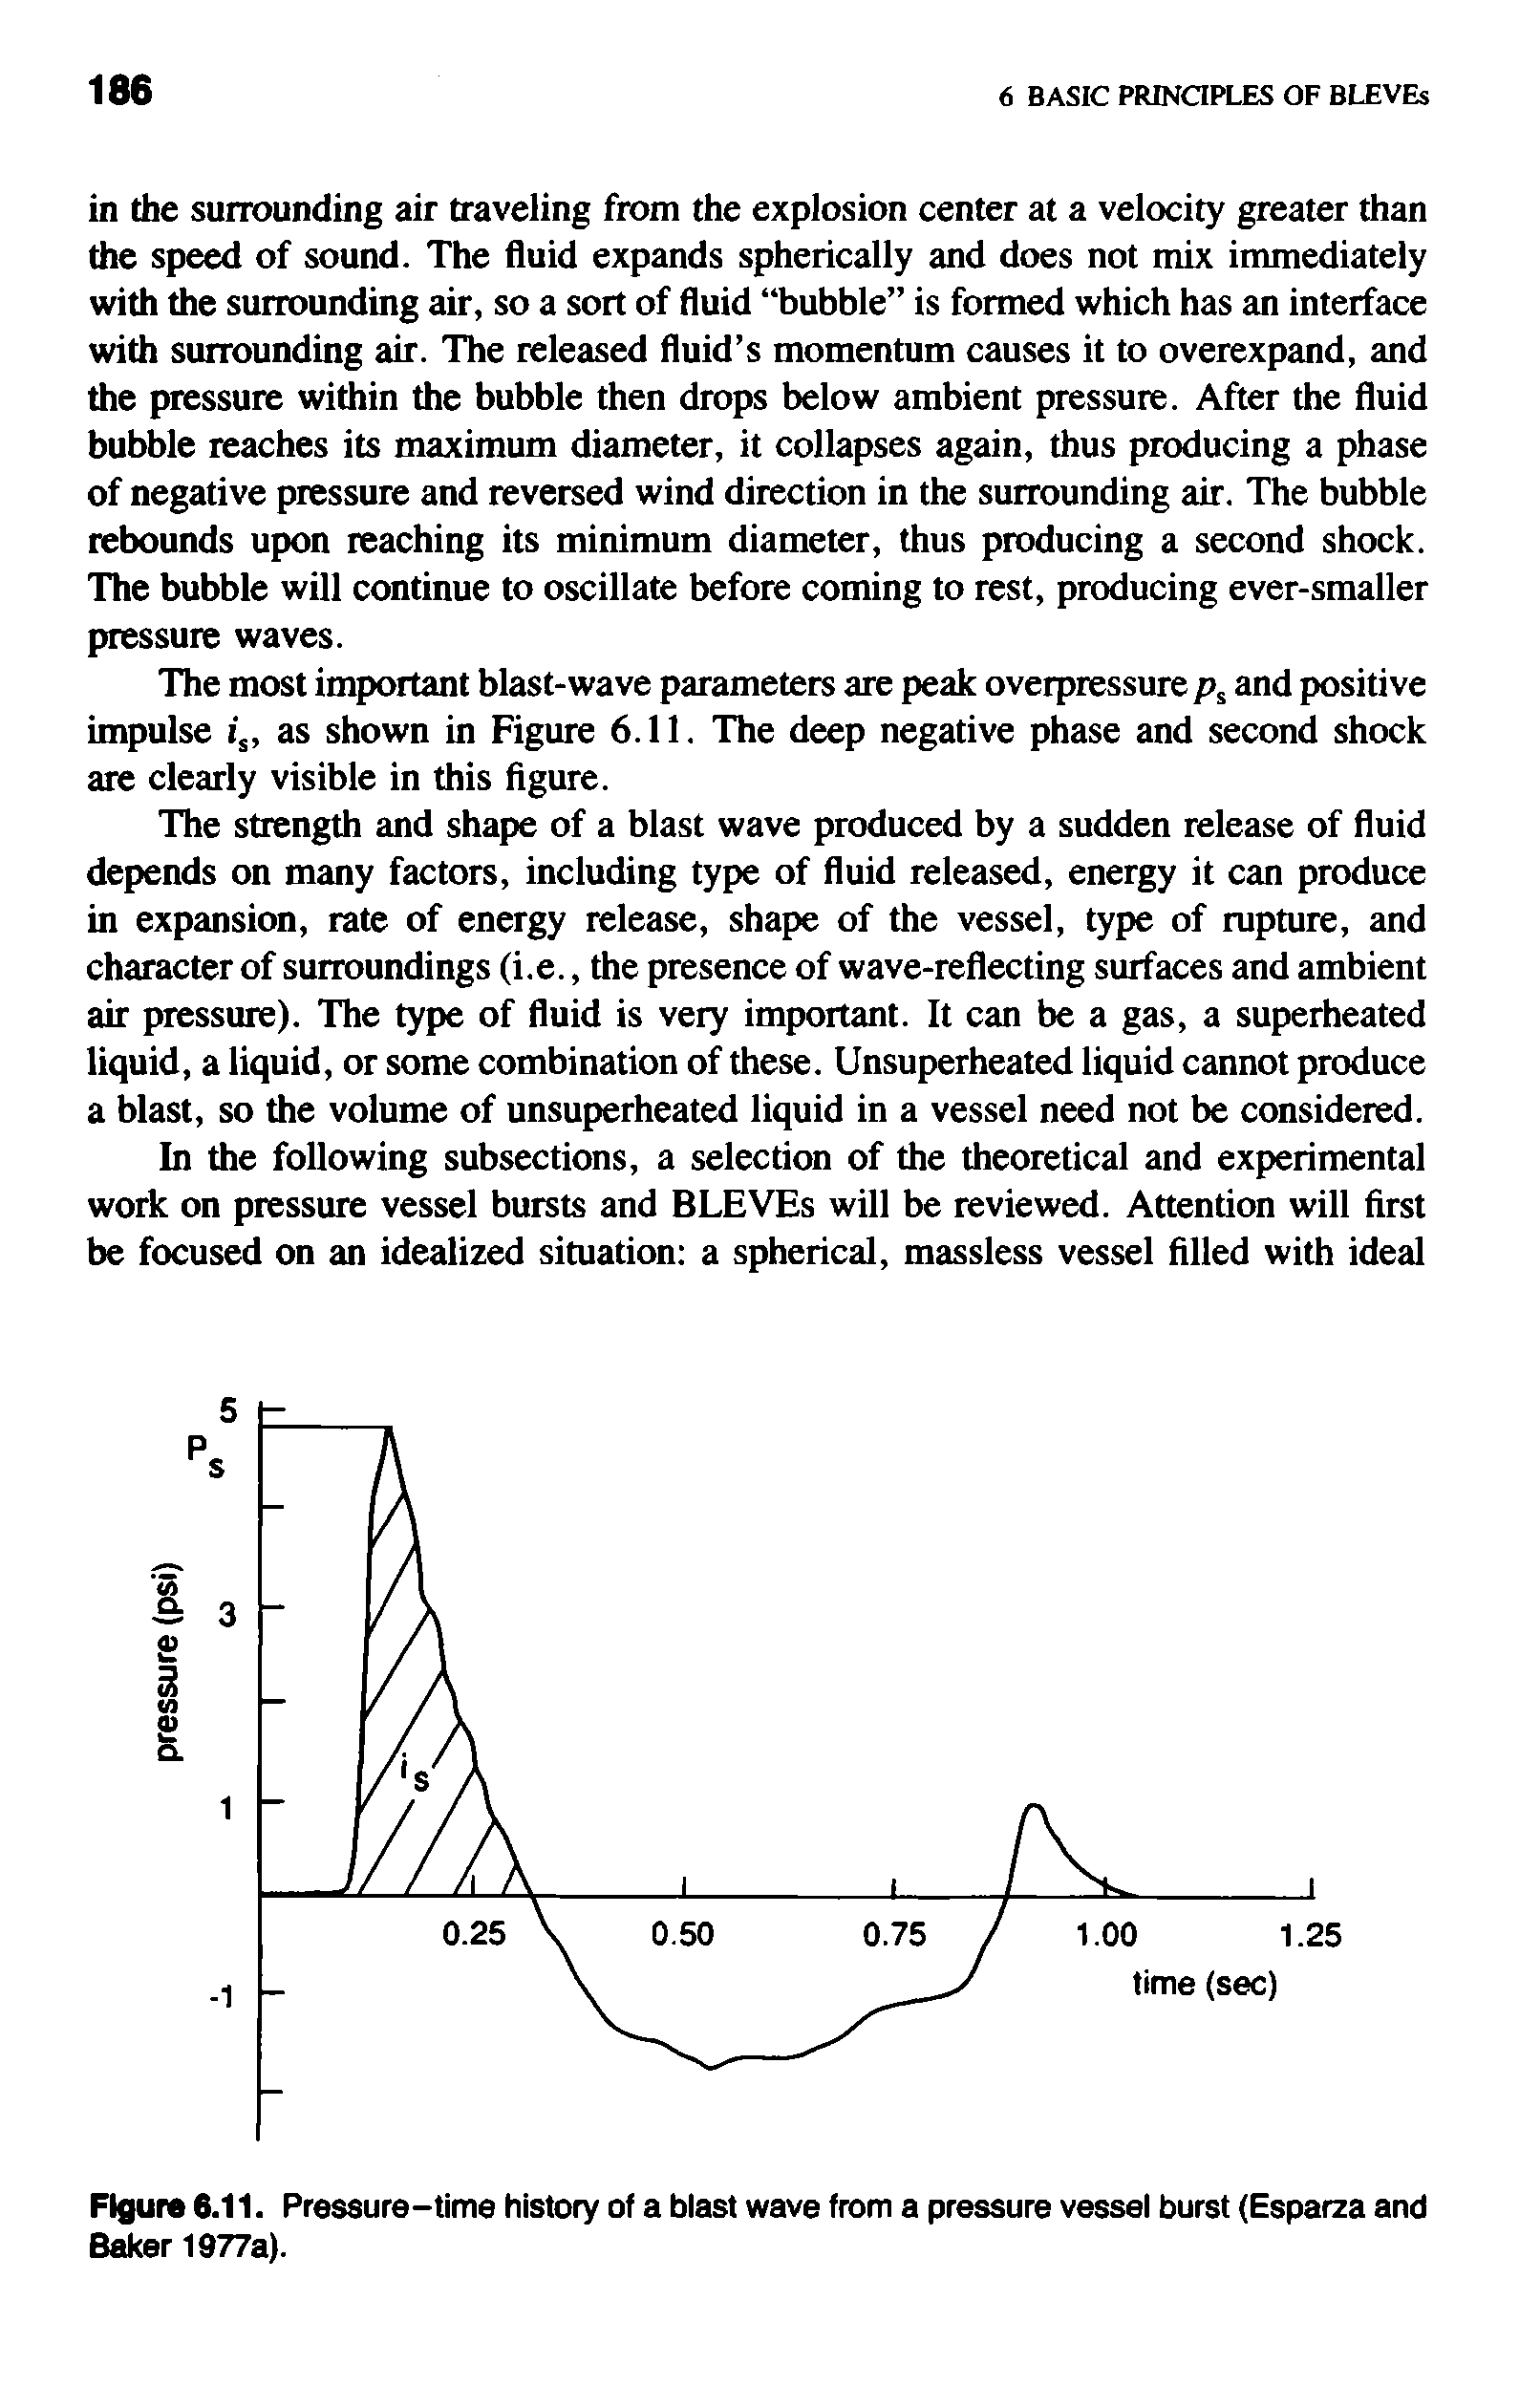 Figure 6.11. Pressure-time history of a biast wave from a pressure vessei burst (Esparza and Baker 1977a).